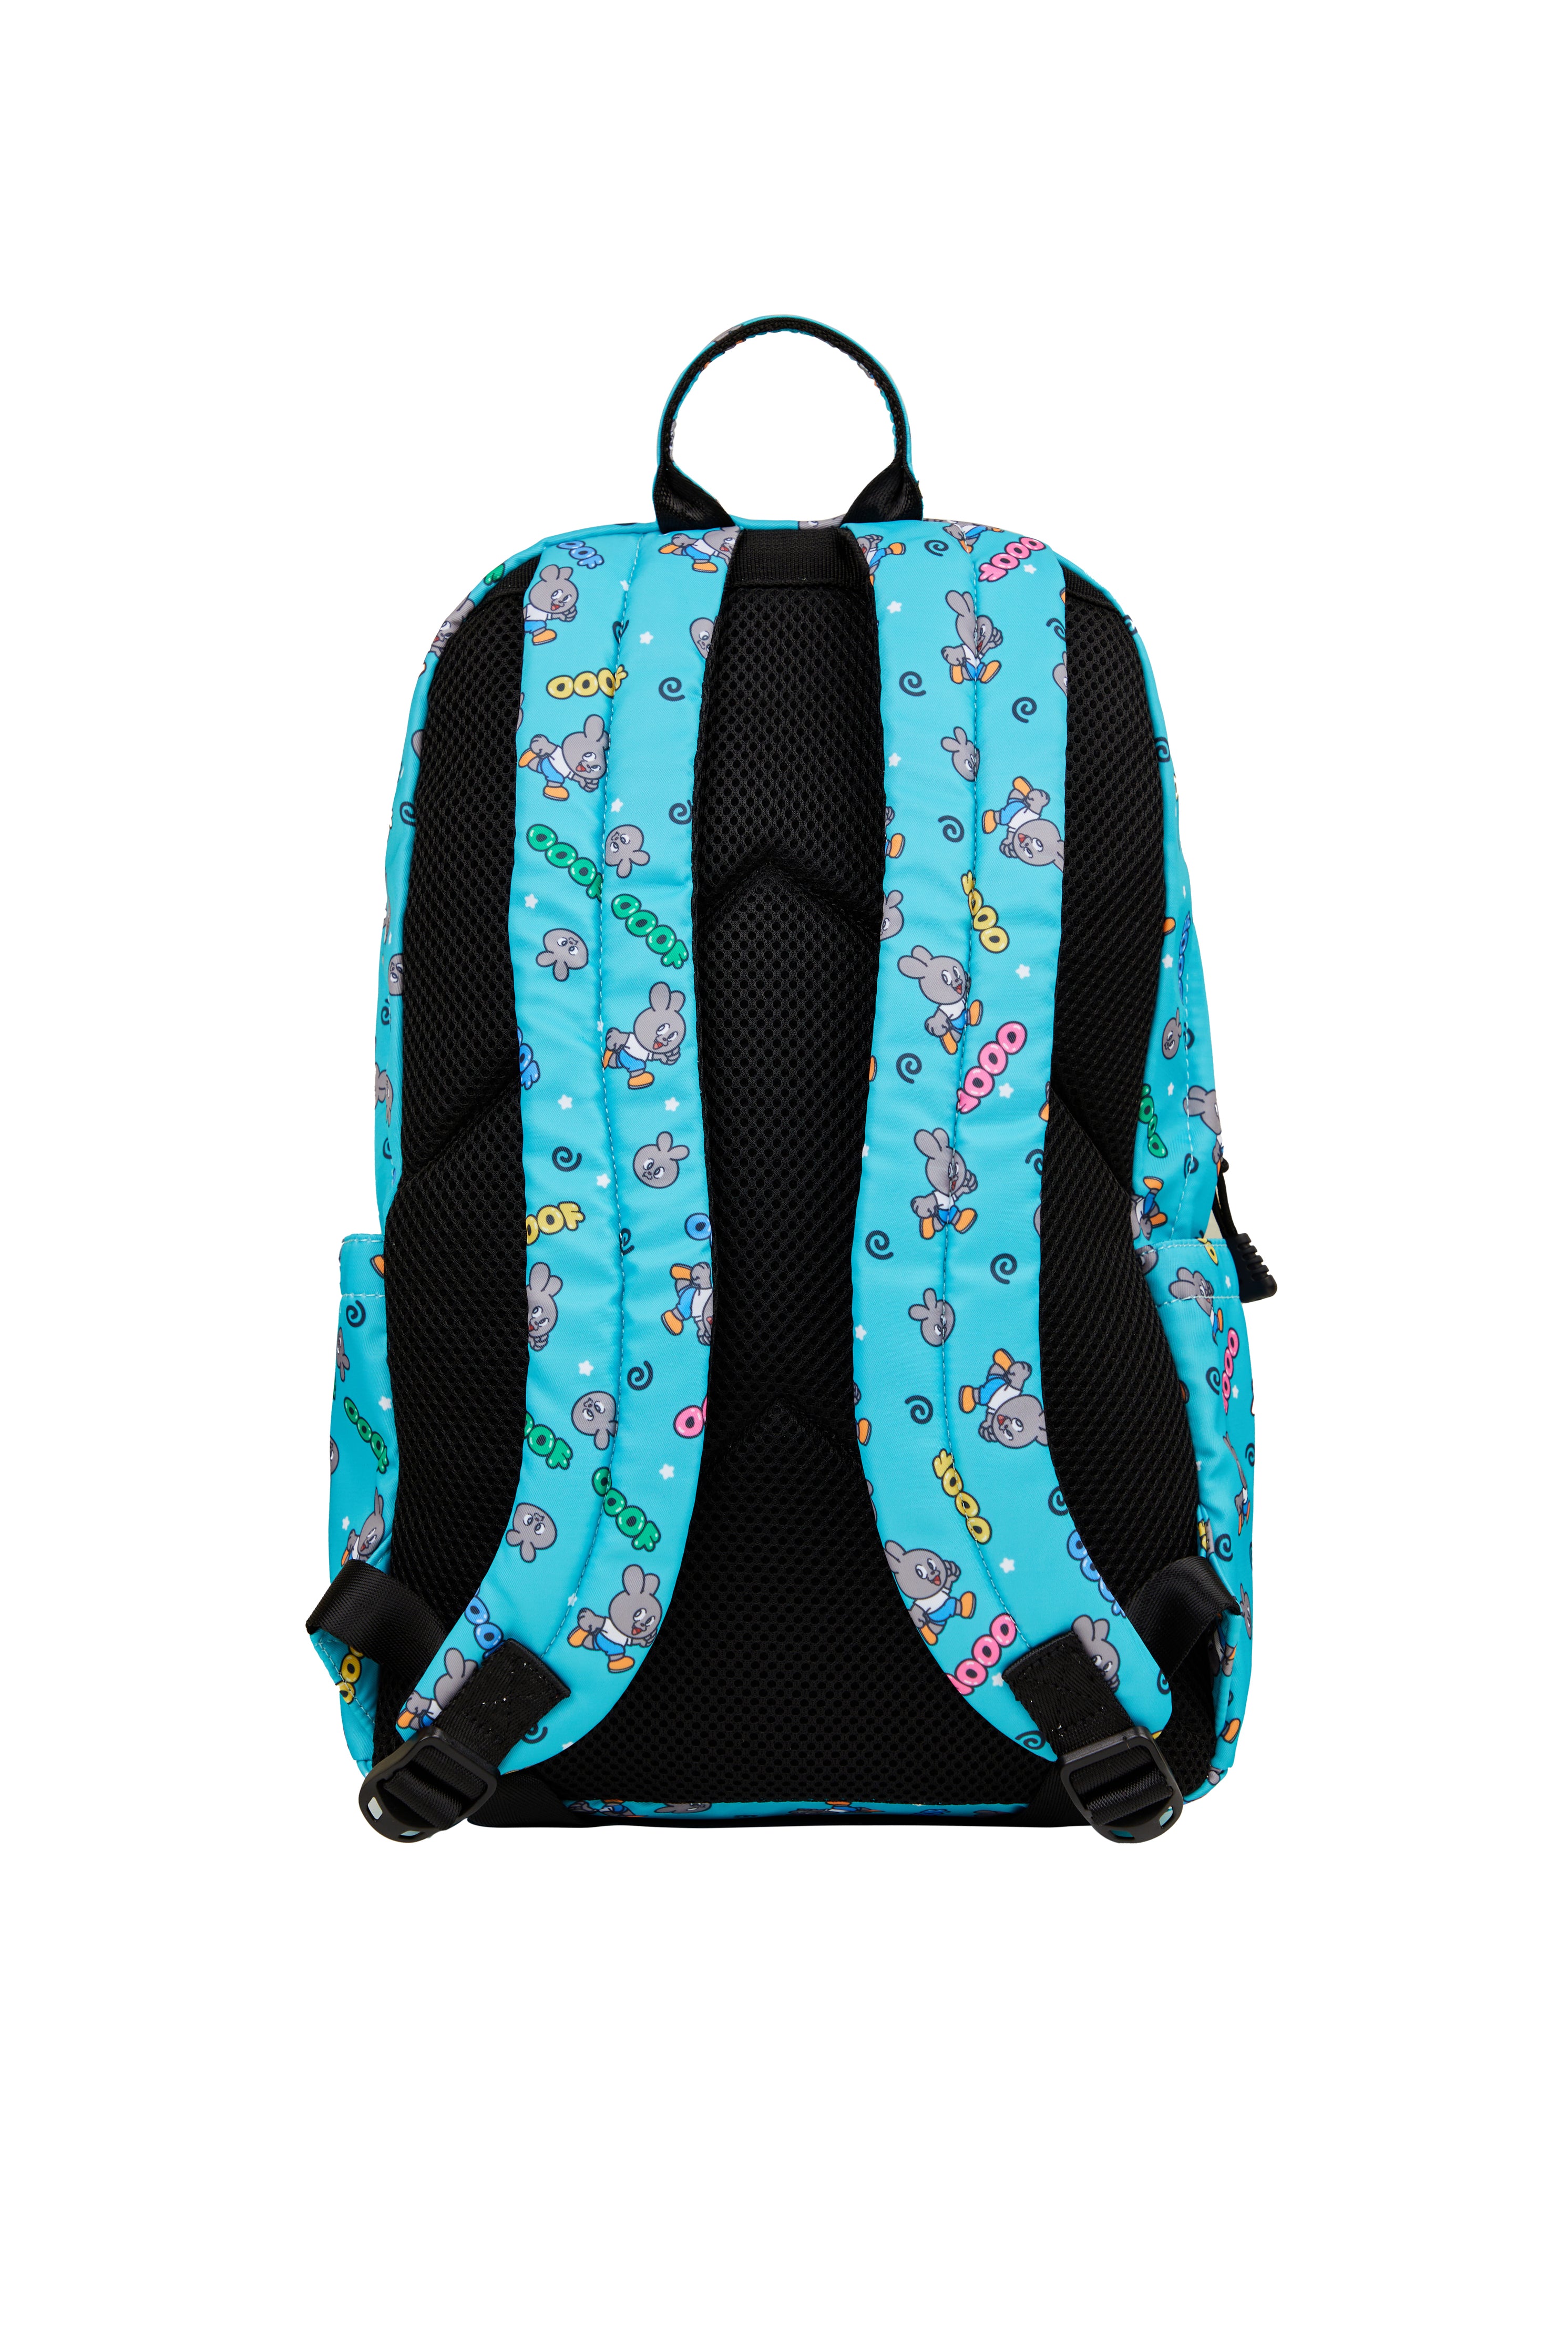 Buy Skybags NEW NEON 23-06 SCHOOL BP (H) TEAL Backpack (Teal, Onesize) at  Amazon.in